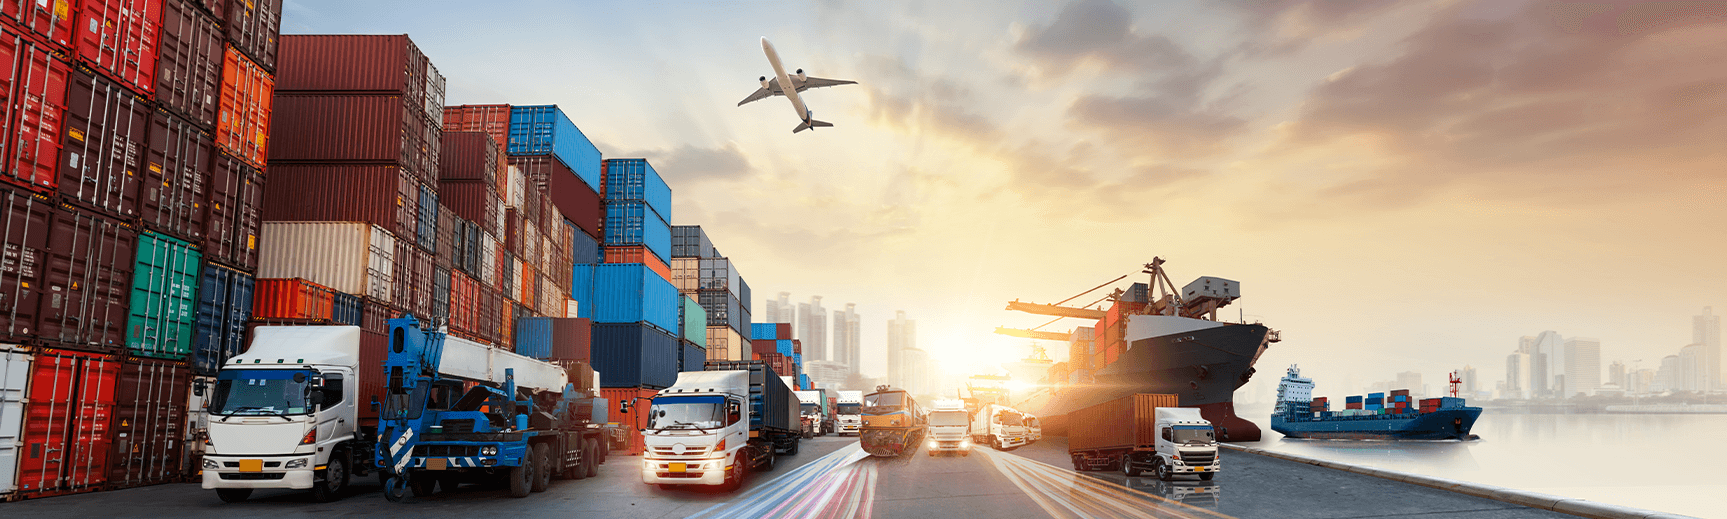 An edited image shows various types of transportation, including a road with semis, a train, a cargo ship, cargo containers, and an airplane flying overhead